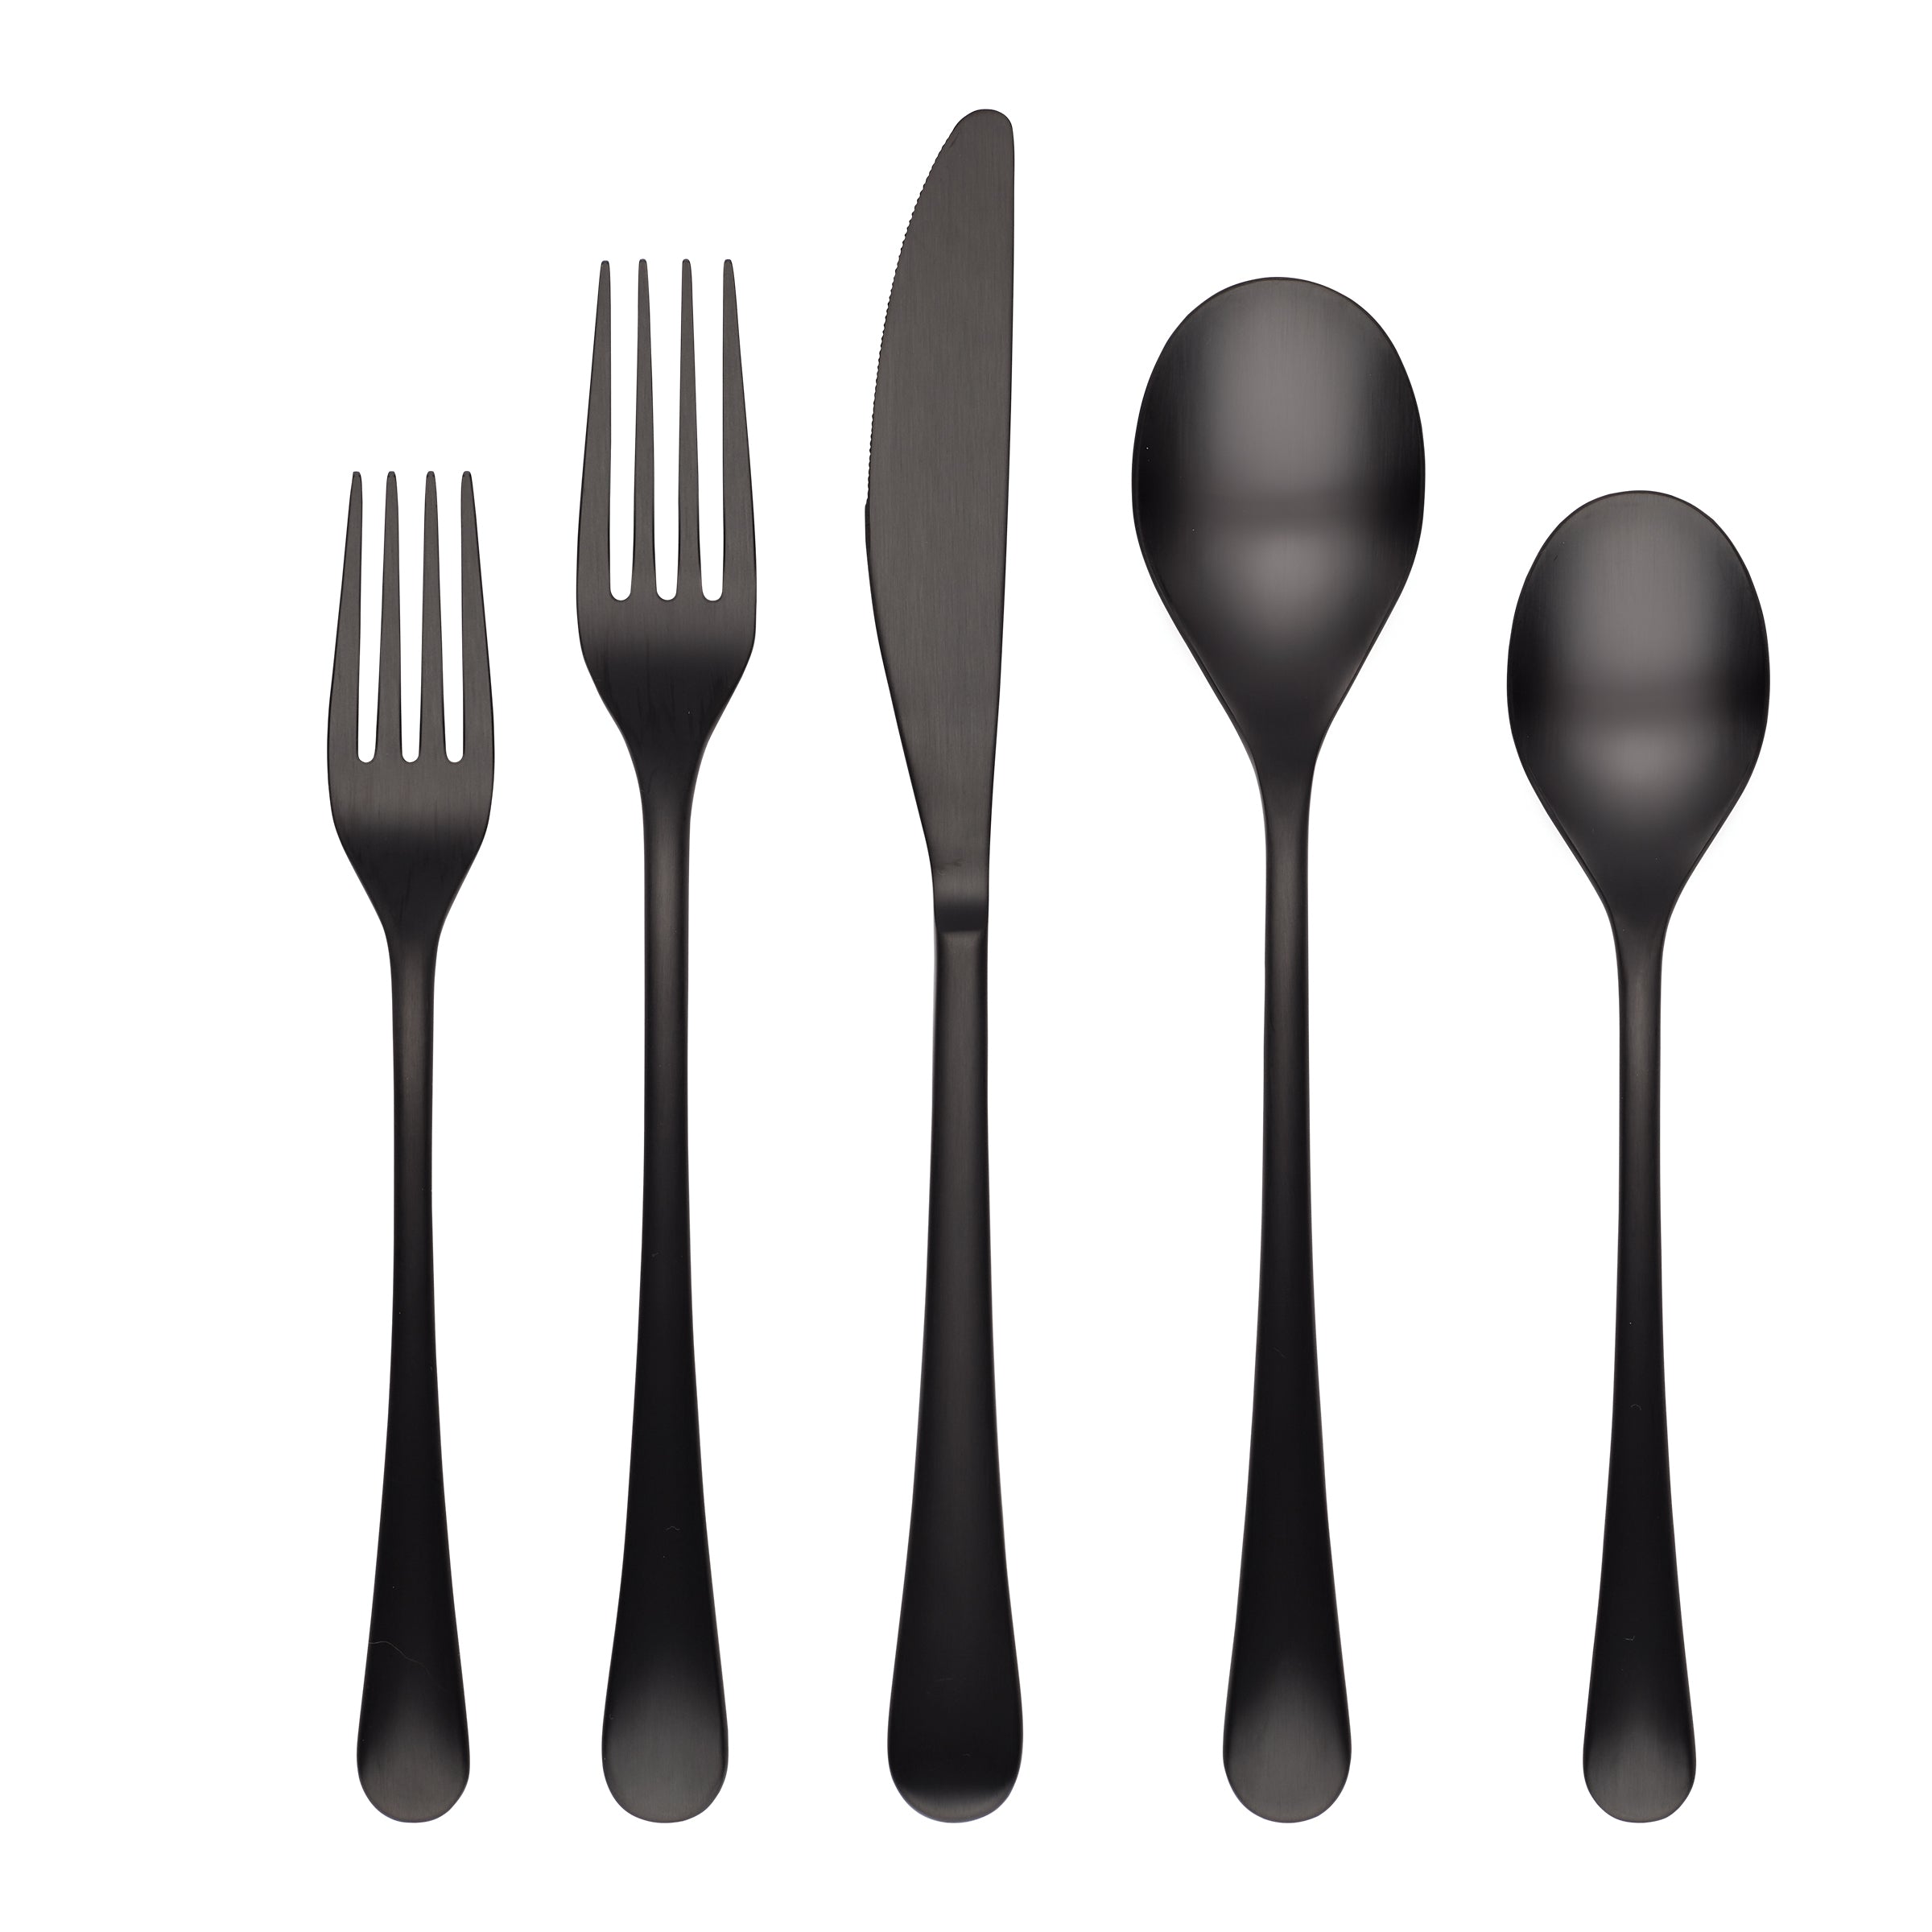 Lapland Forest' Flatware - Stainless Steel Black PVD Flatware – Nora Knives